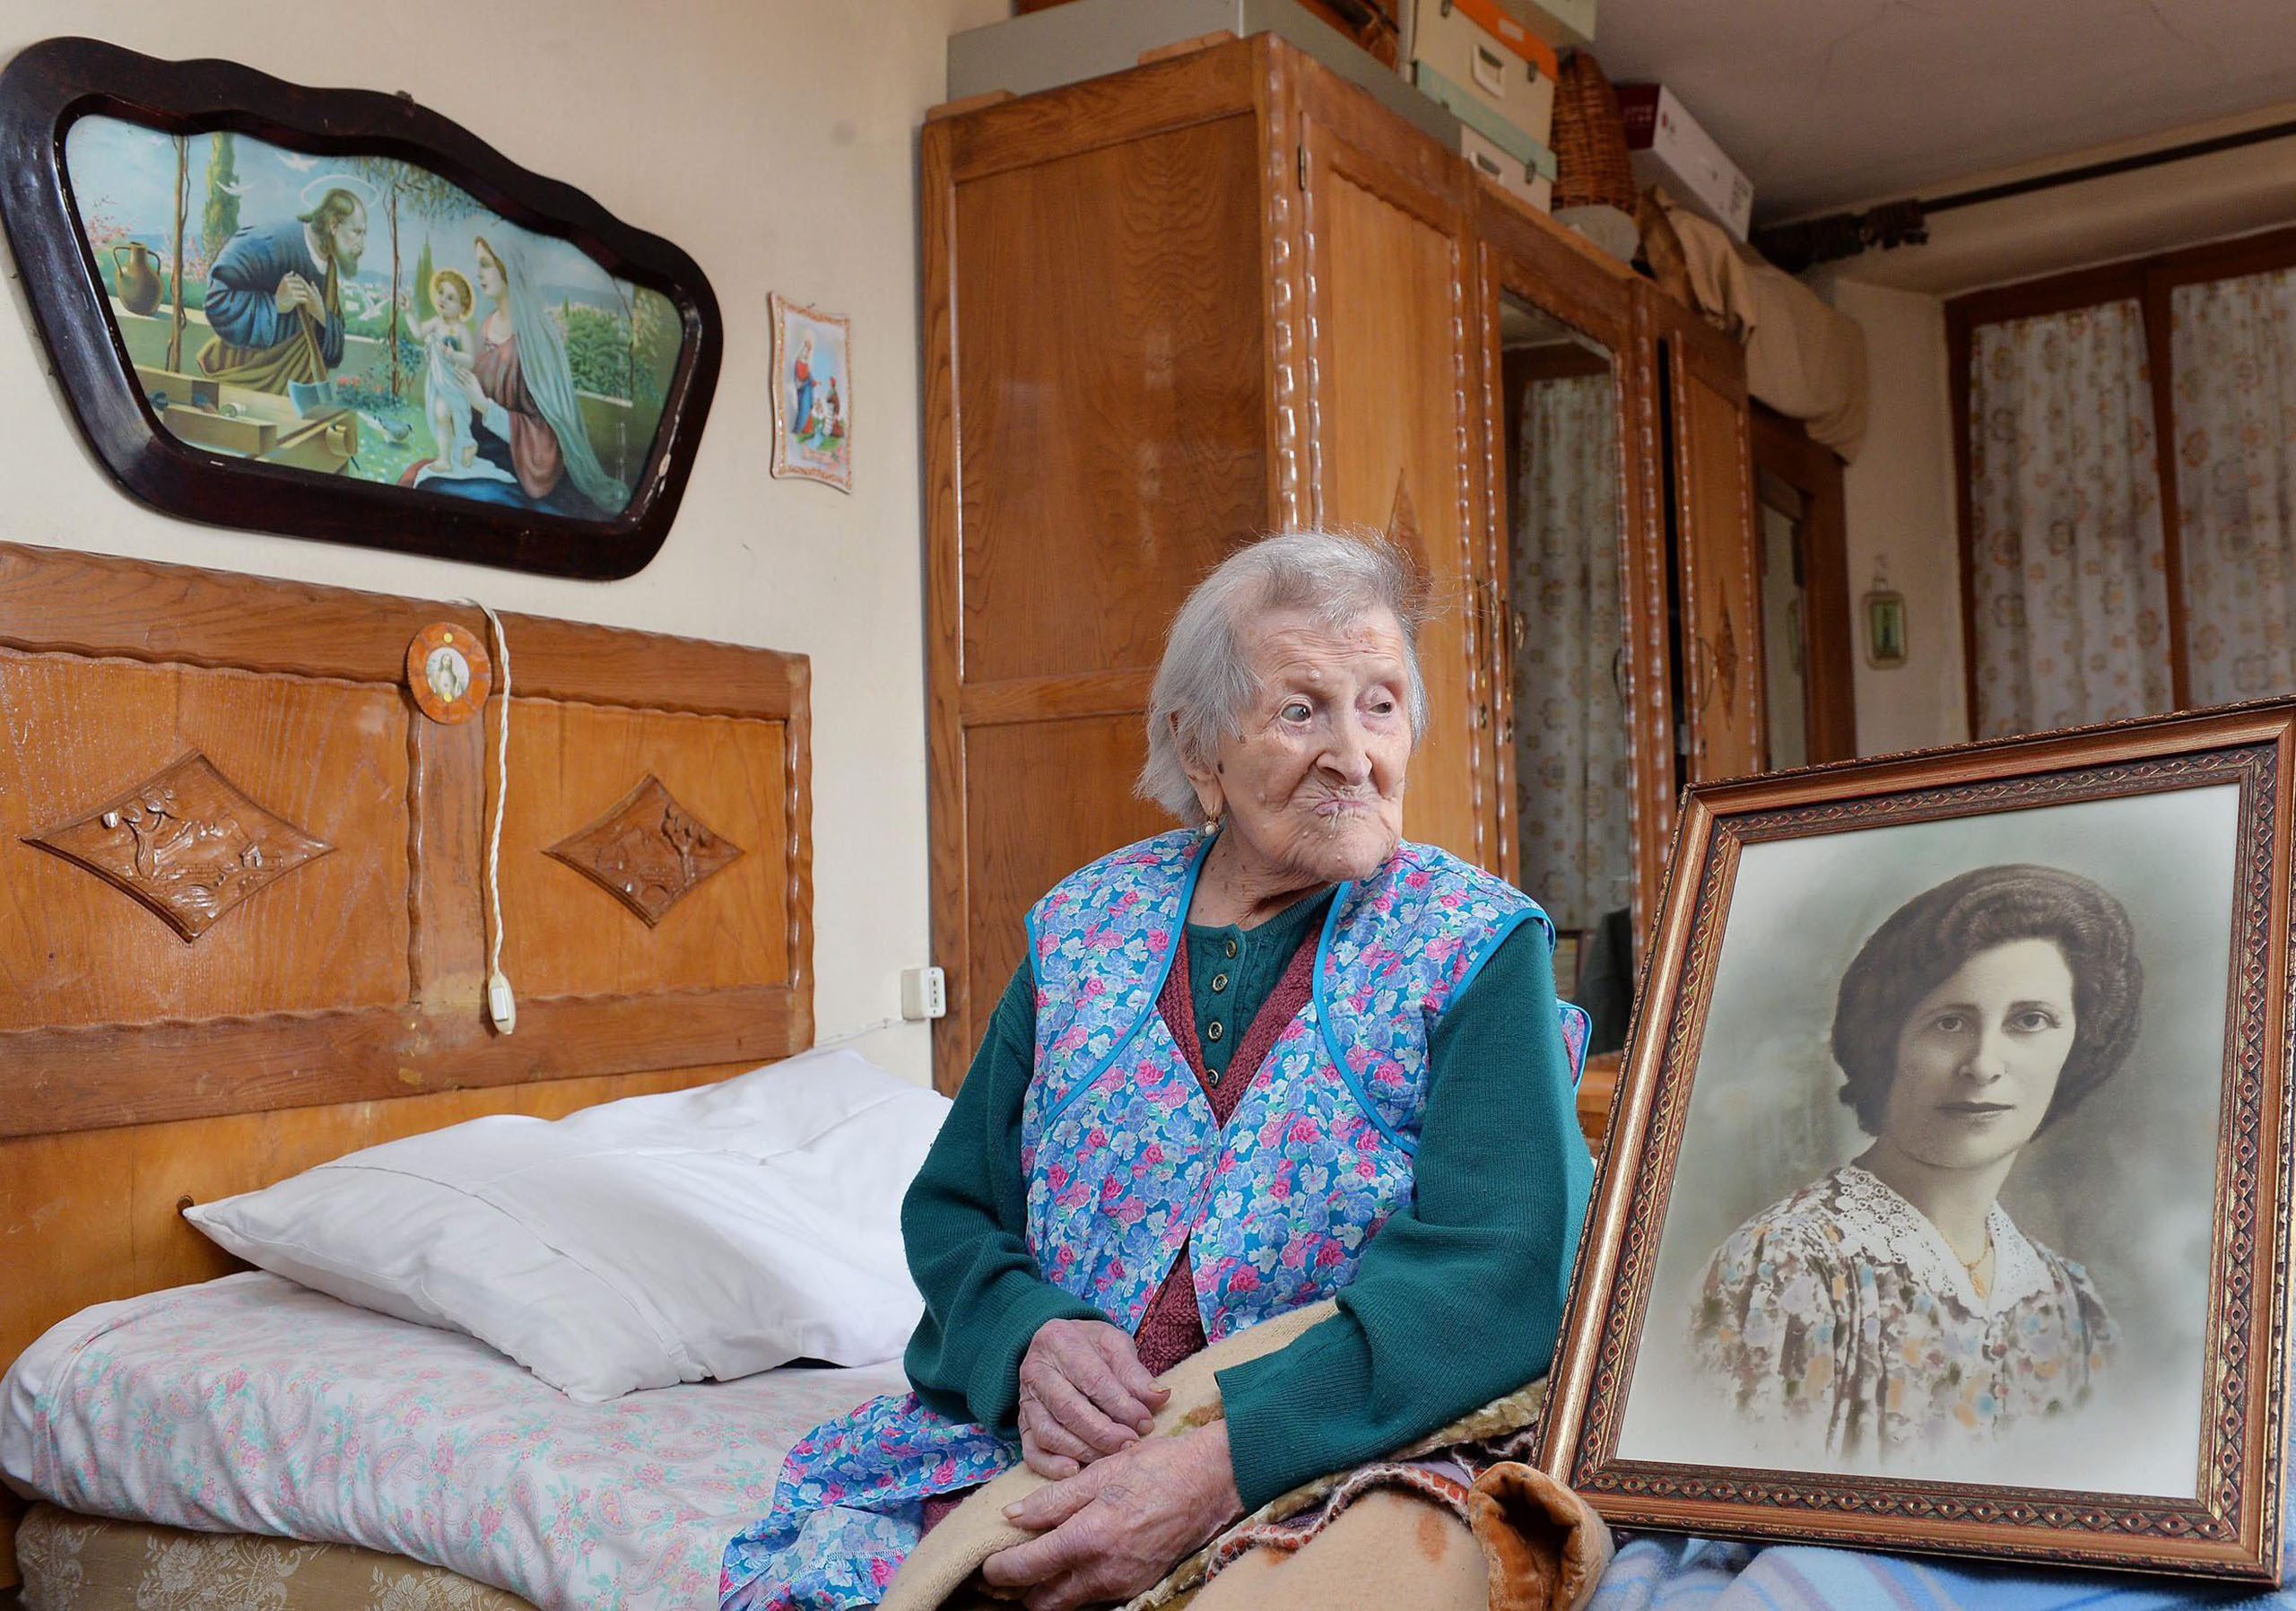 Italian woman becomes world's oldest person